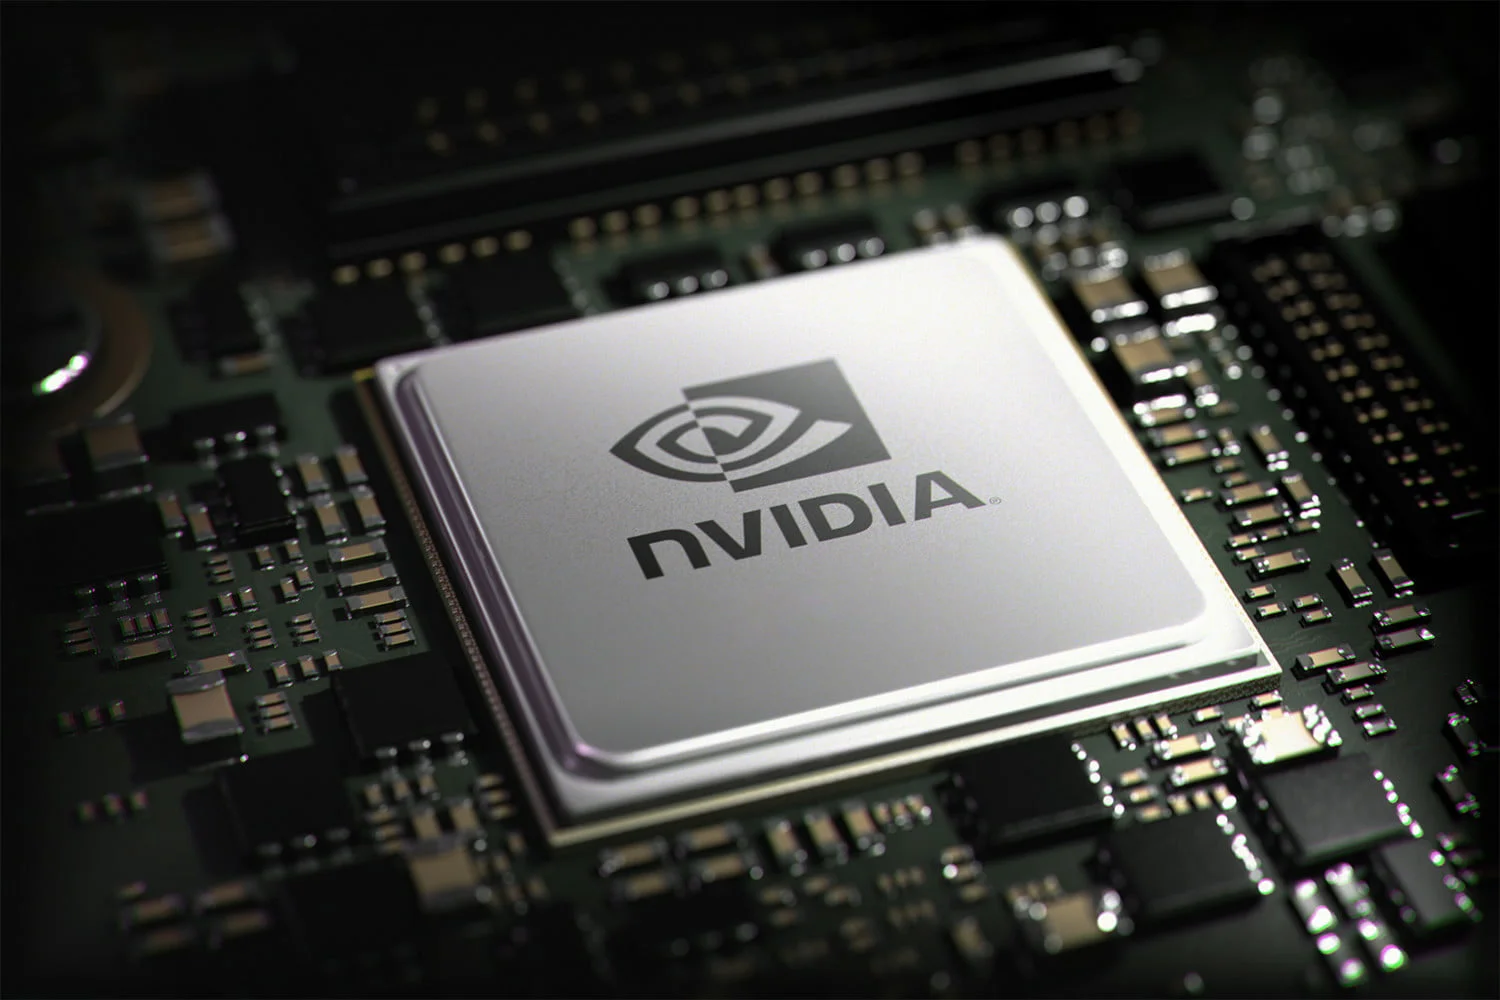 Nvidia one of the largest Chip manufacturer.